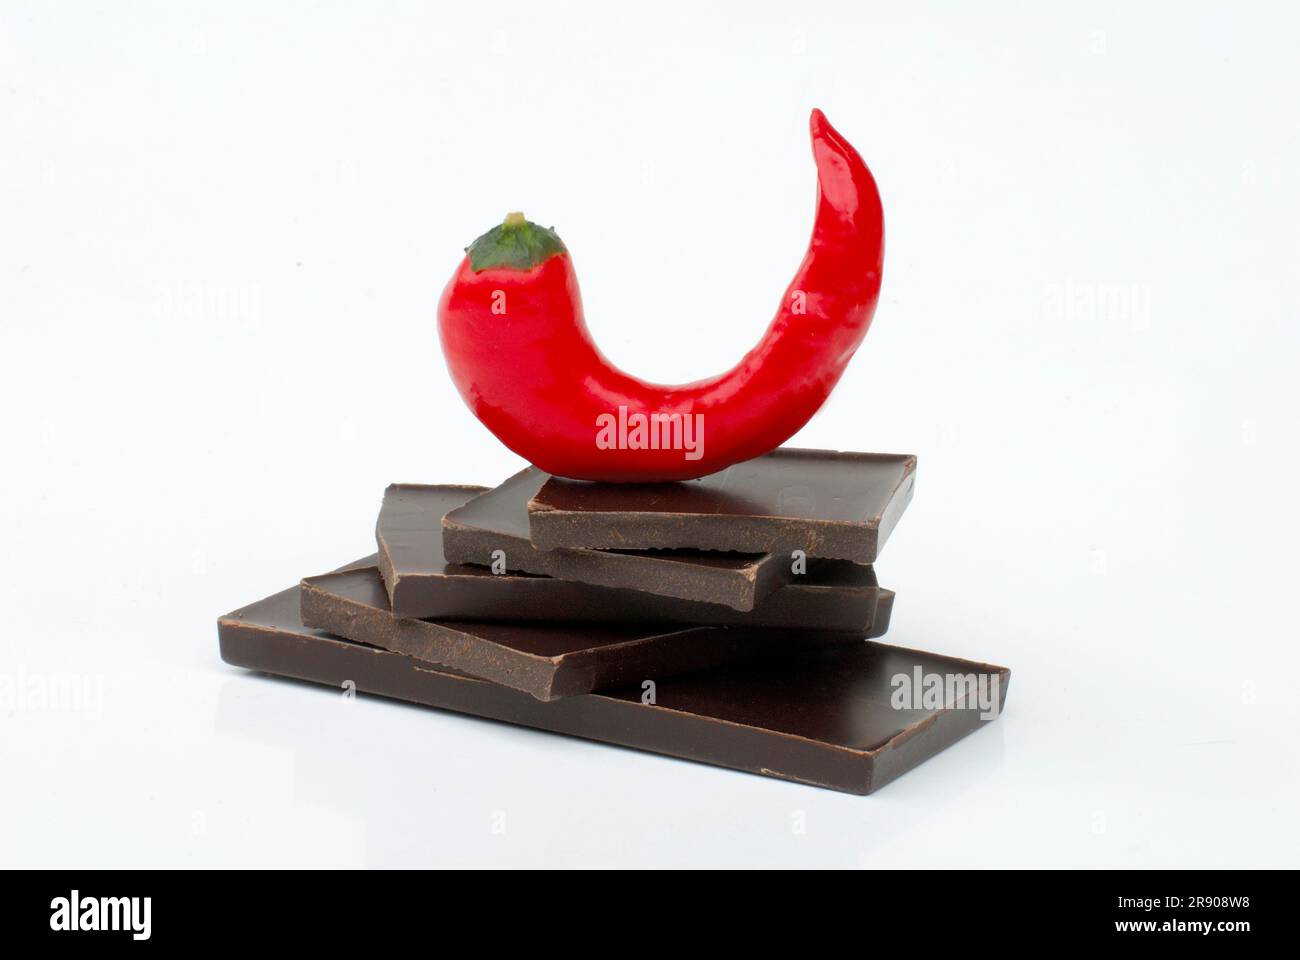 Chocolate pieces and chili pepper, piece, chocolate piece, dark, pepper, paprika, chili pepper, chili pepper Stock Photo